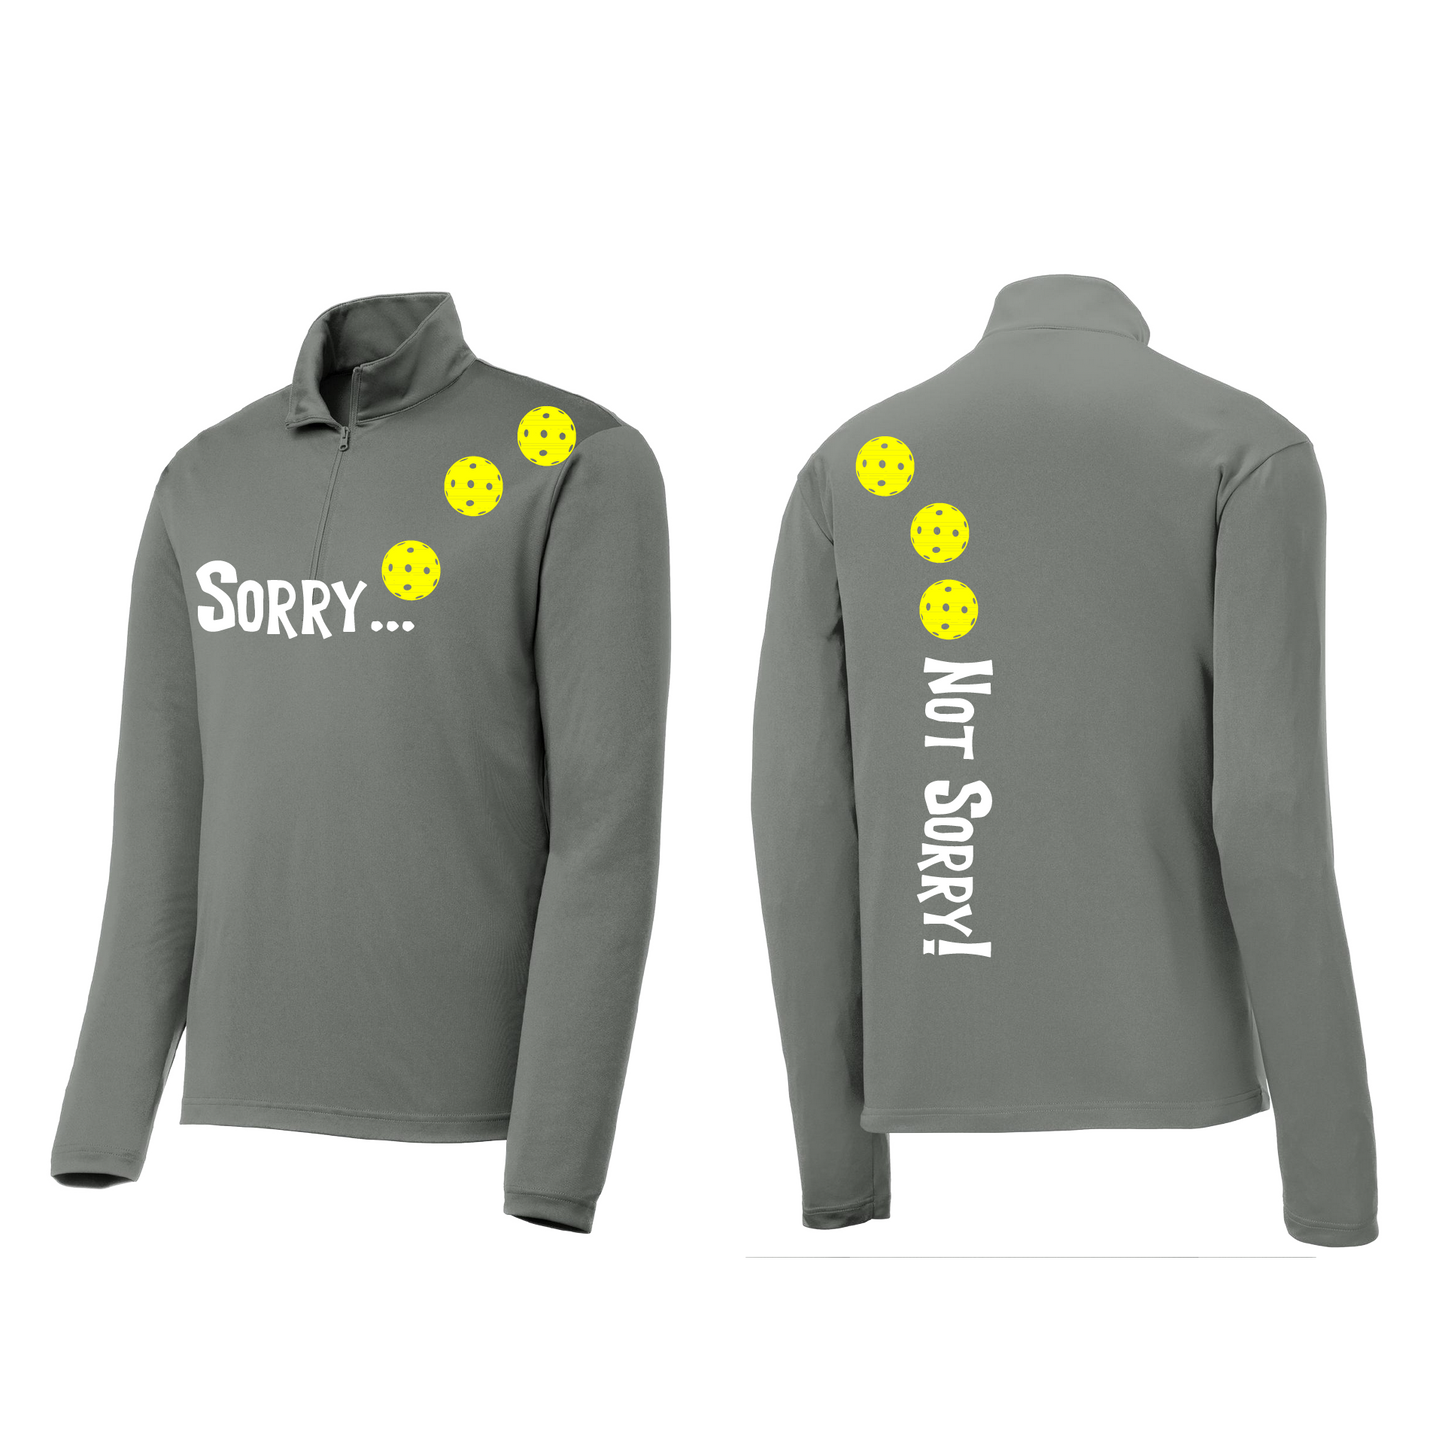 Pickleball Design: Sorry... Not Sorry Customizable Pickleball colors: White, Green; Yellow or Pink Balls Men’s 1/4 Zip Pullover-8 Ball Colors Turn up the volume in this Men's shirt with its perfect mix of softness and attitude. Material is ultra-comfortable with moisture wicking properties and tri-blend softness. PosiCharge technology locks in color. Highly breathable and lightweight. Versatile enough for wearing year-round.